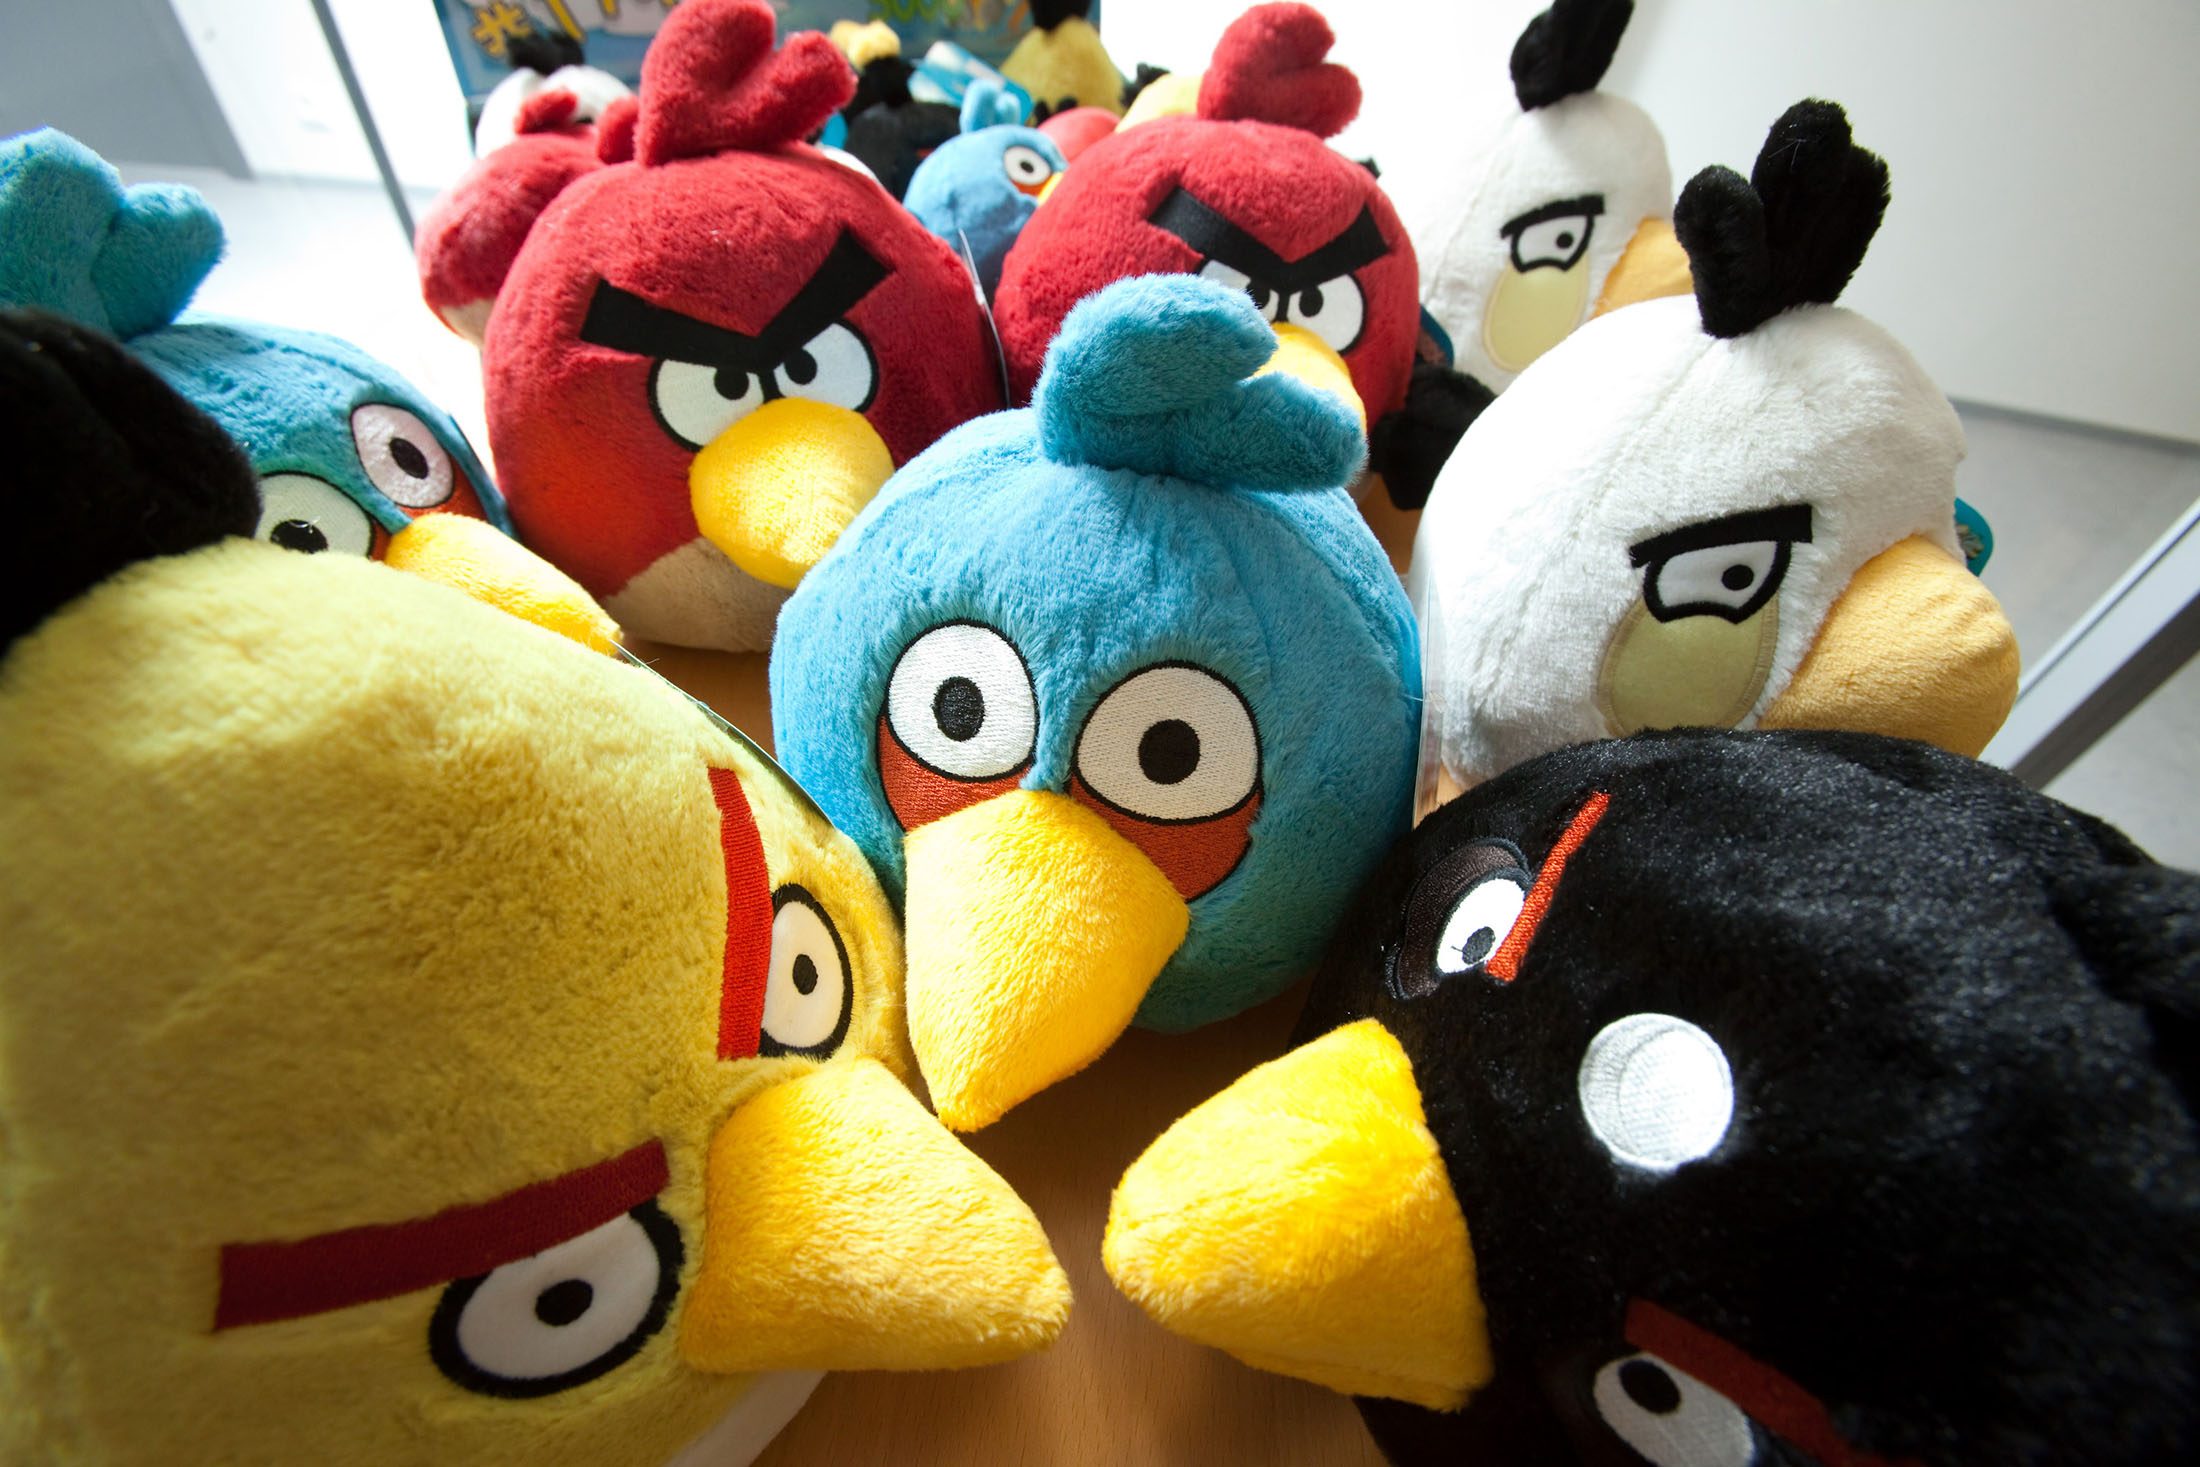 Angry Birds maker Rovio plans IPO that may value game firm at $2b